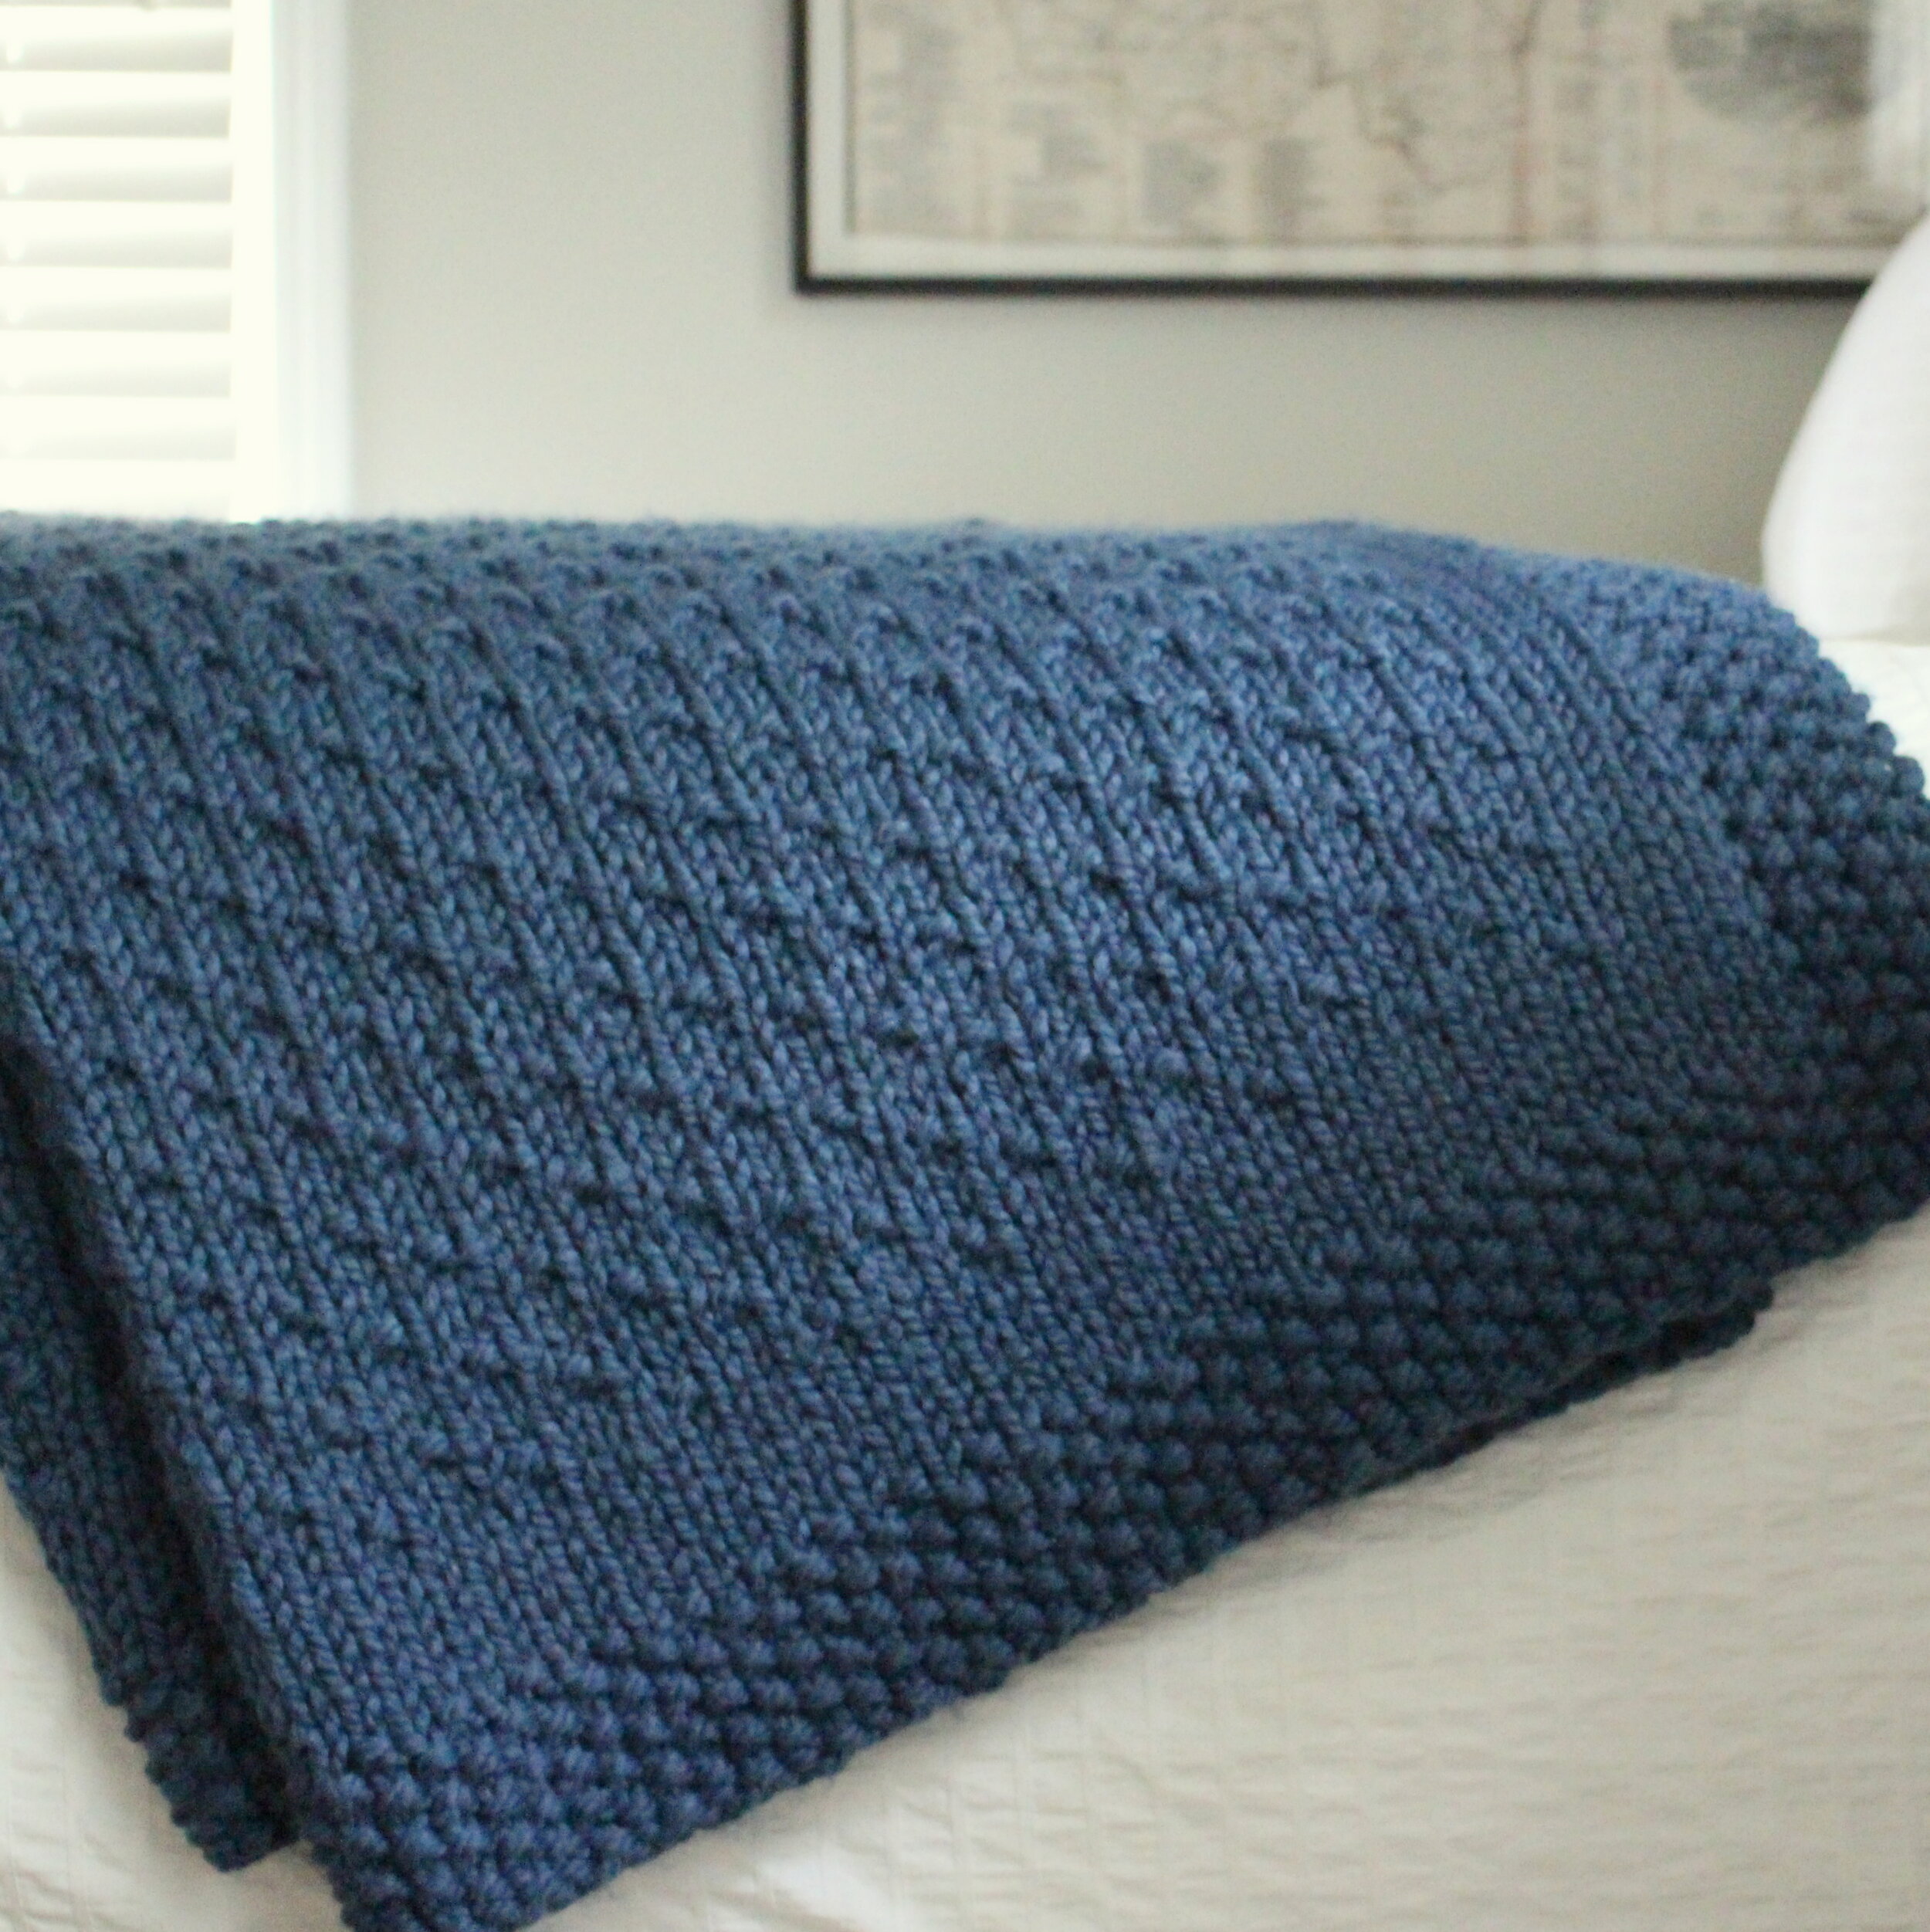 How to Knit a Blanket for Winter. So Cozy!